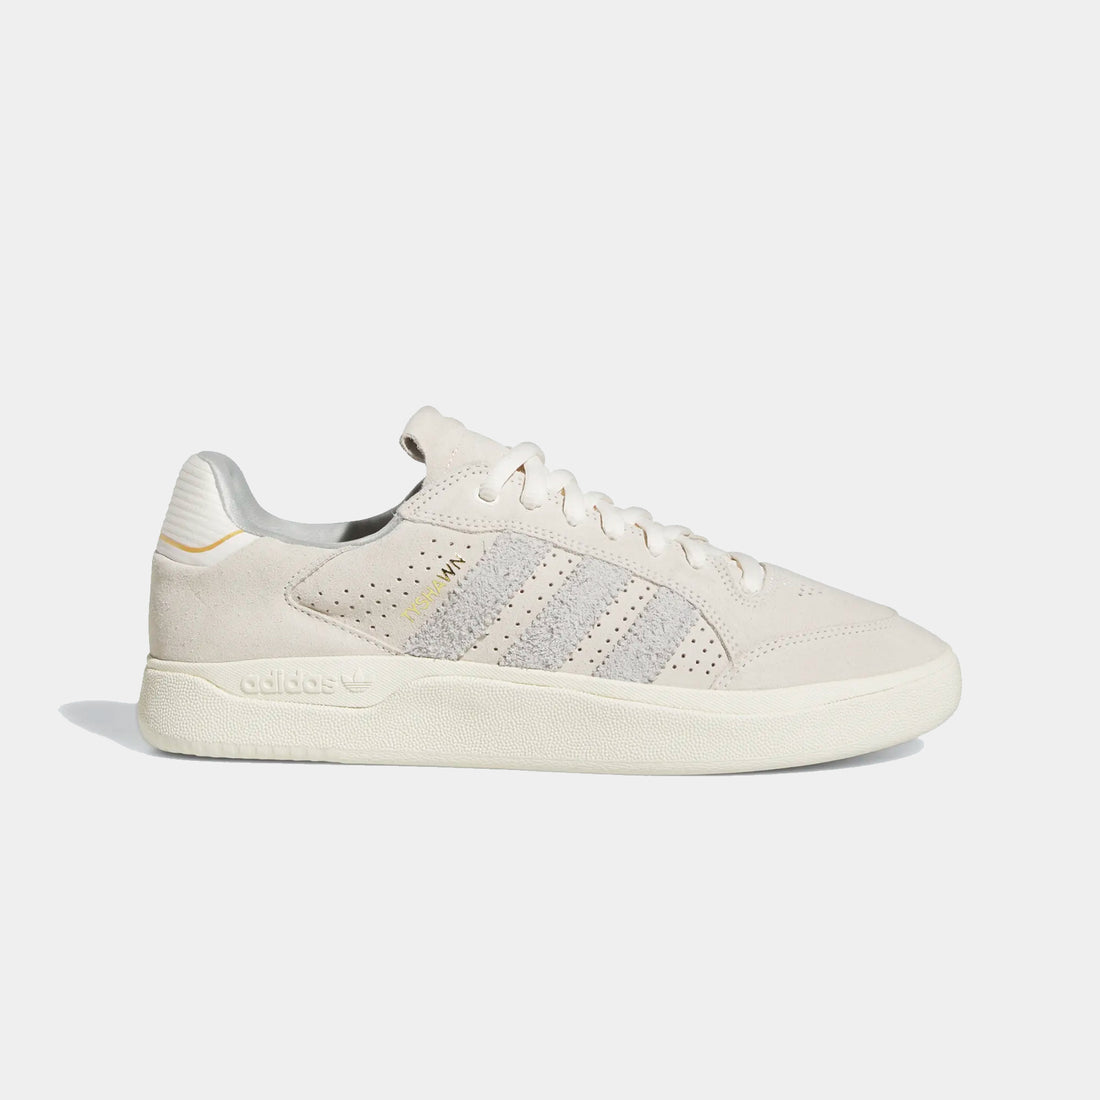 Paire de chaussures tyshawn low adidas